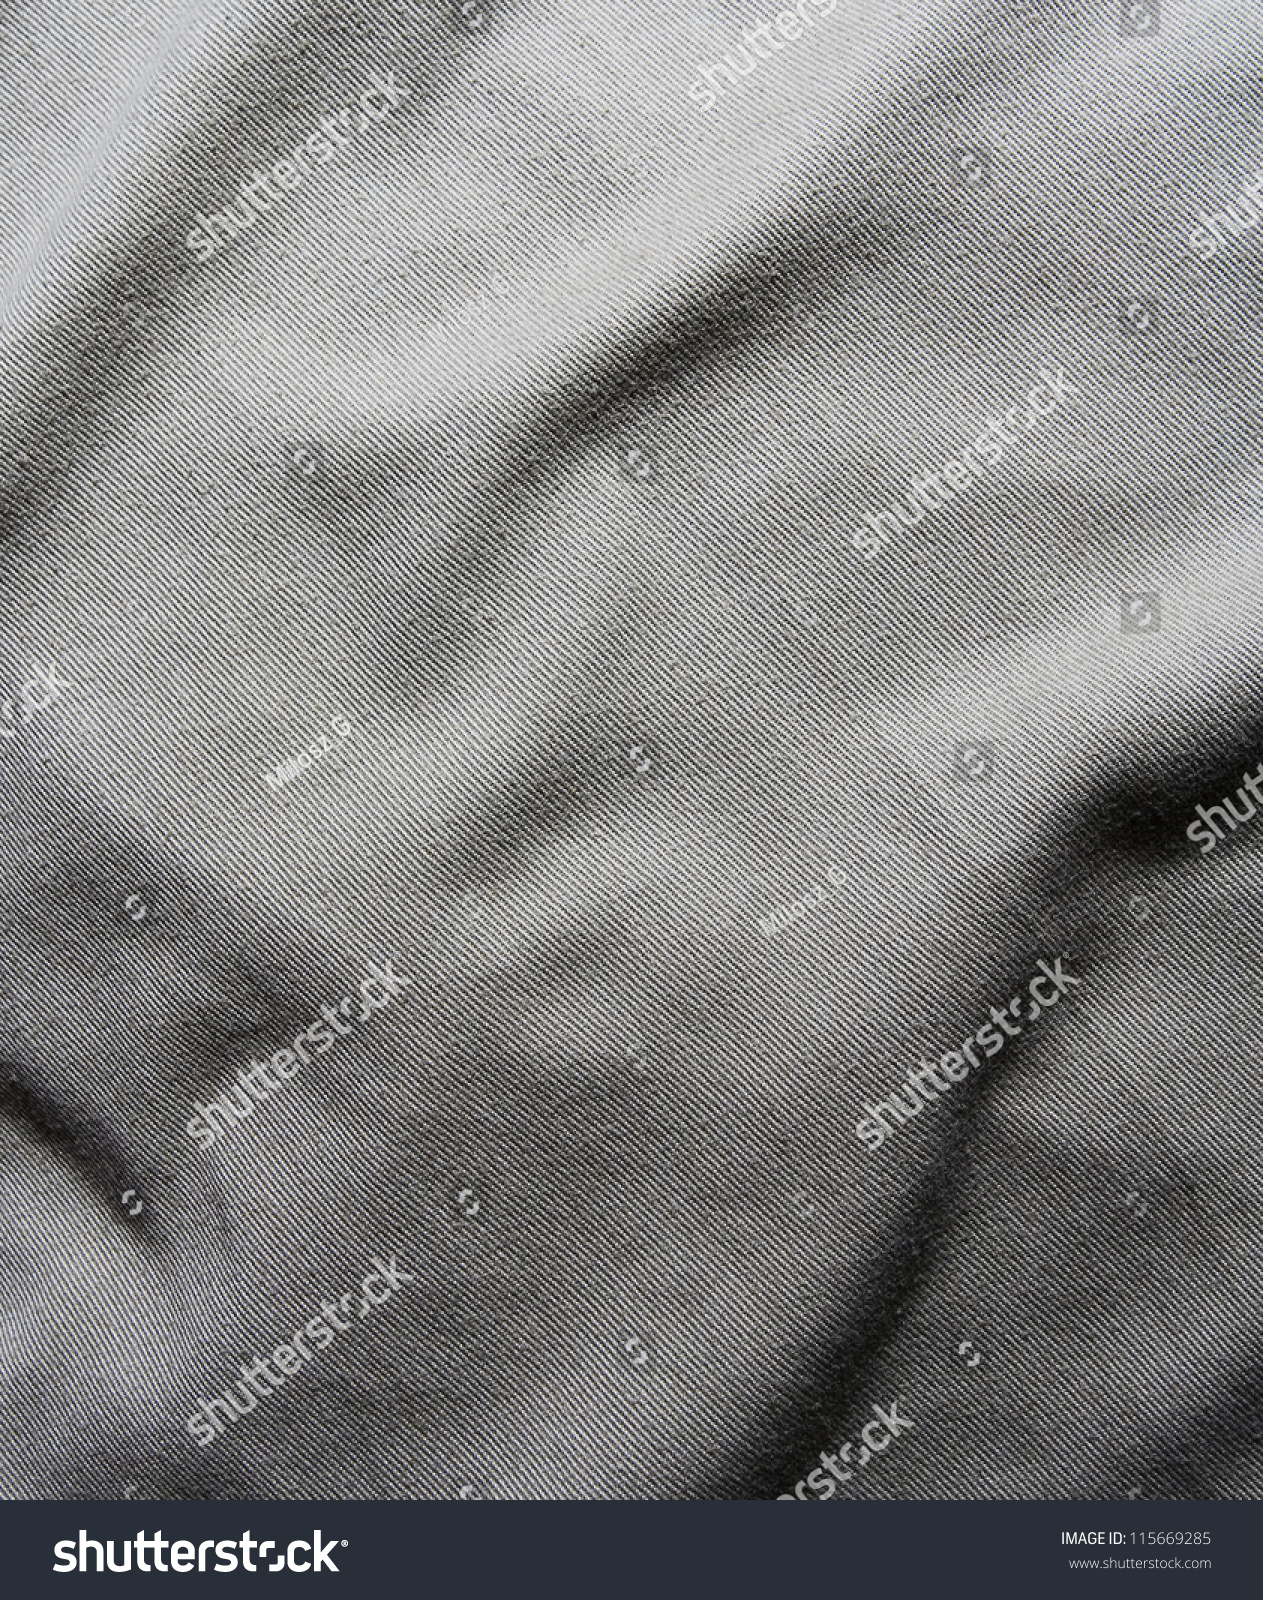 Gray Creased Material Background Or Texture Stock Photo 115669285 ...